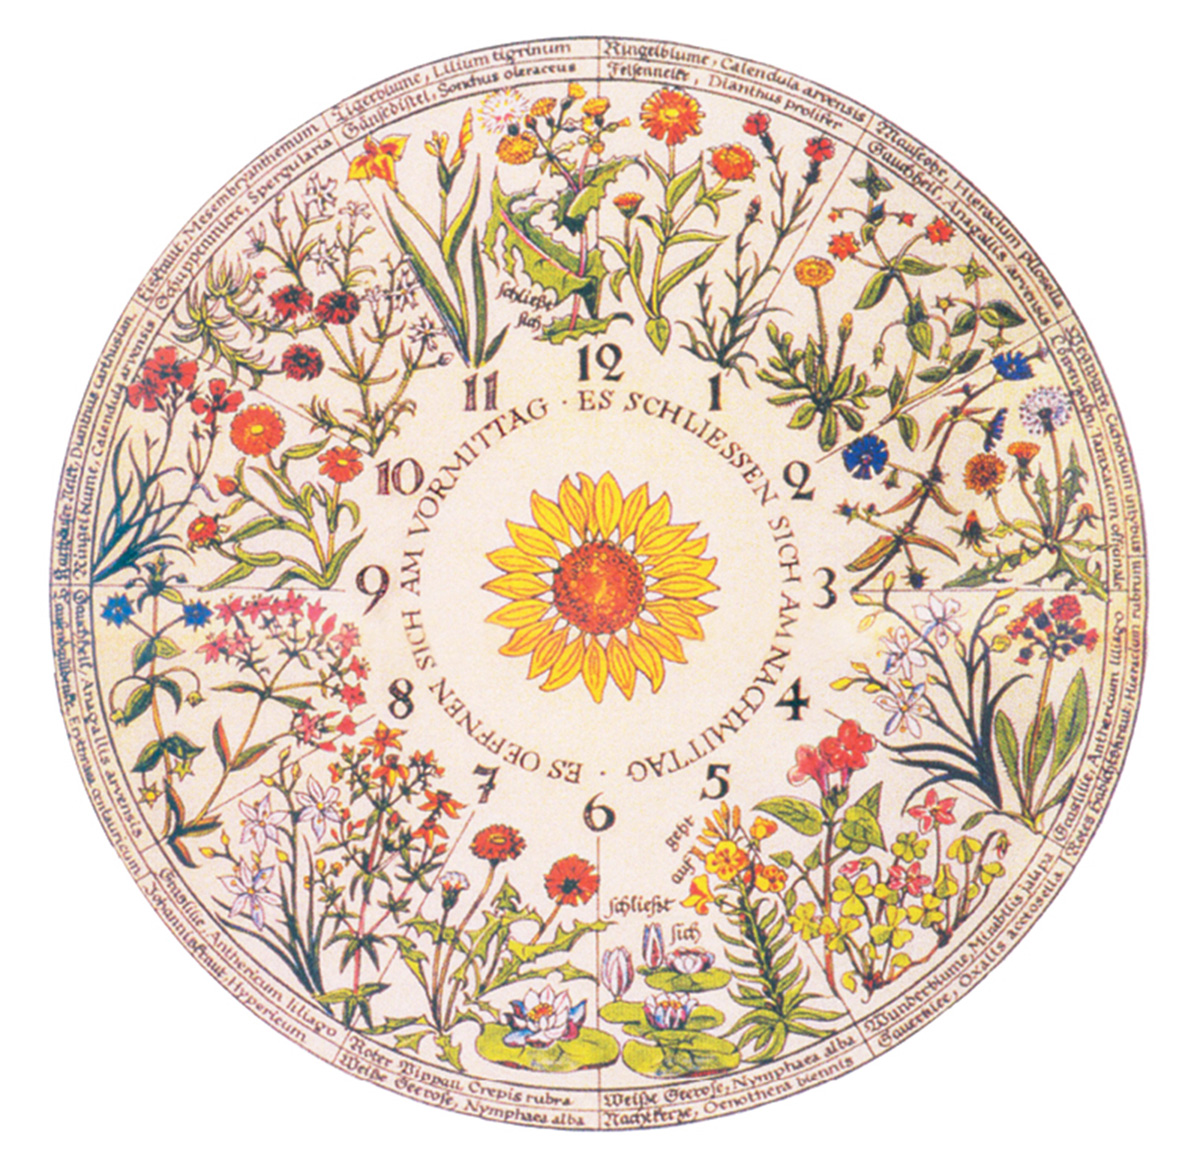 A clock face painted with a plant species at each hour to replicate a horologium florae.